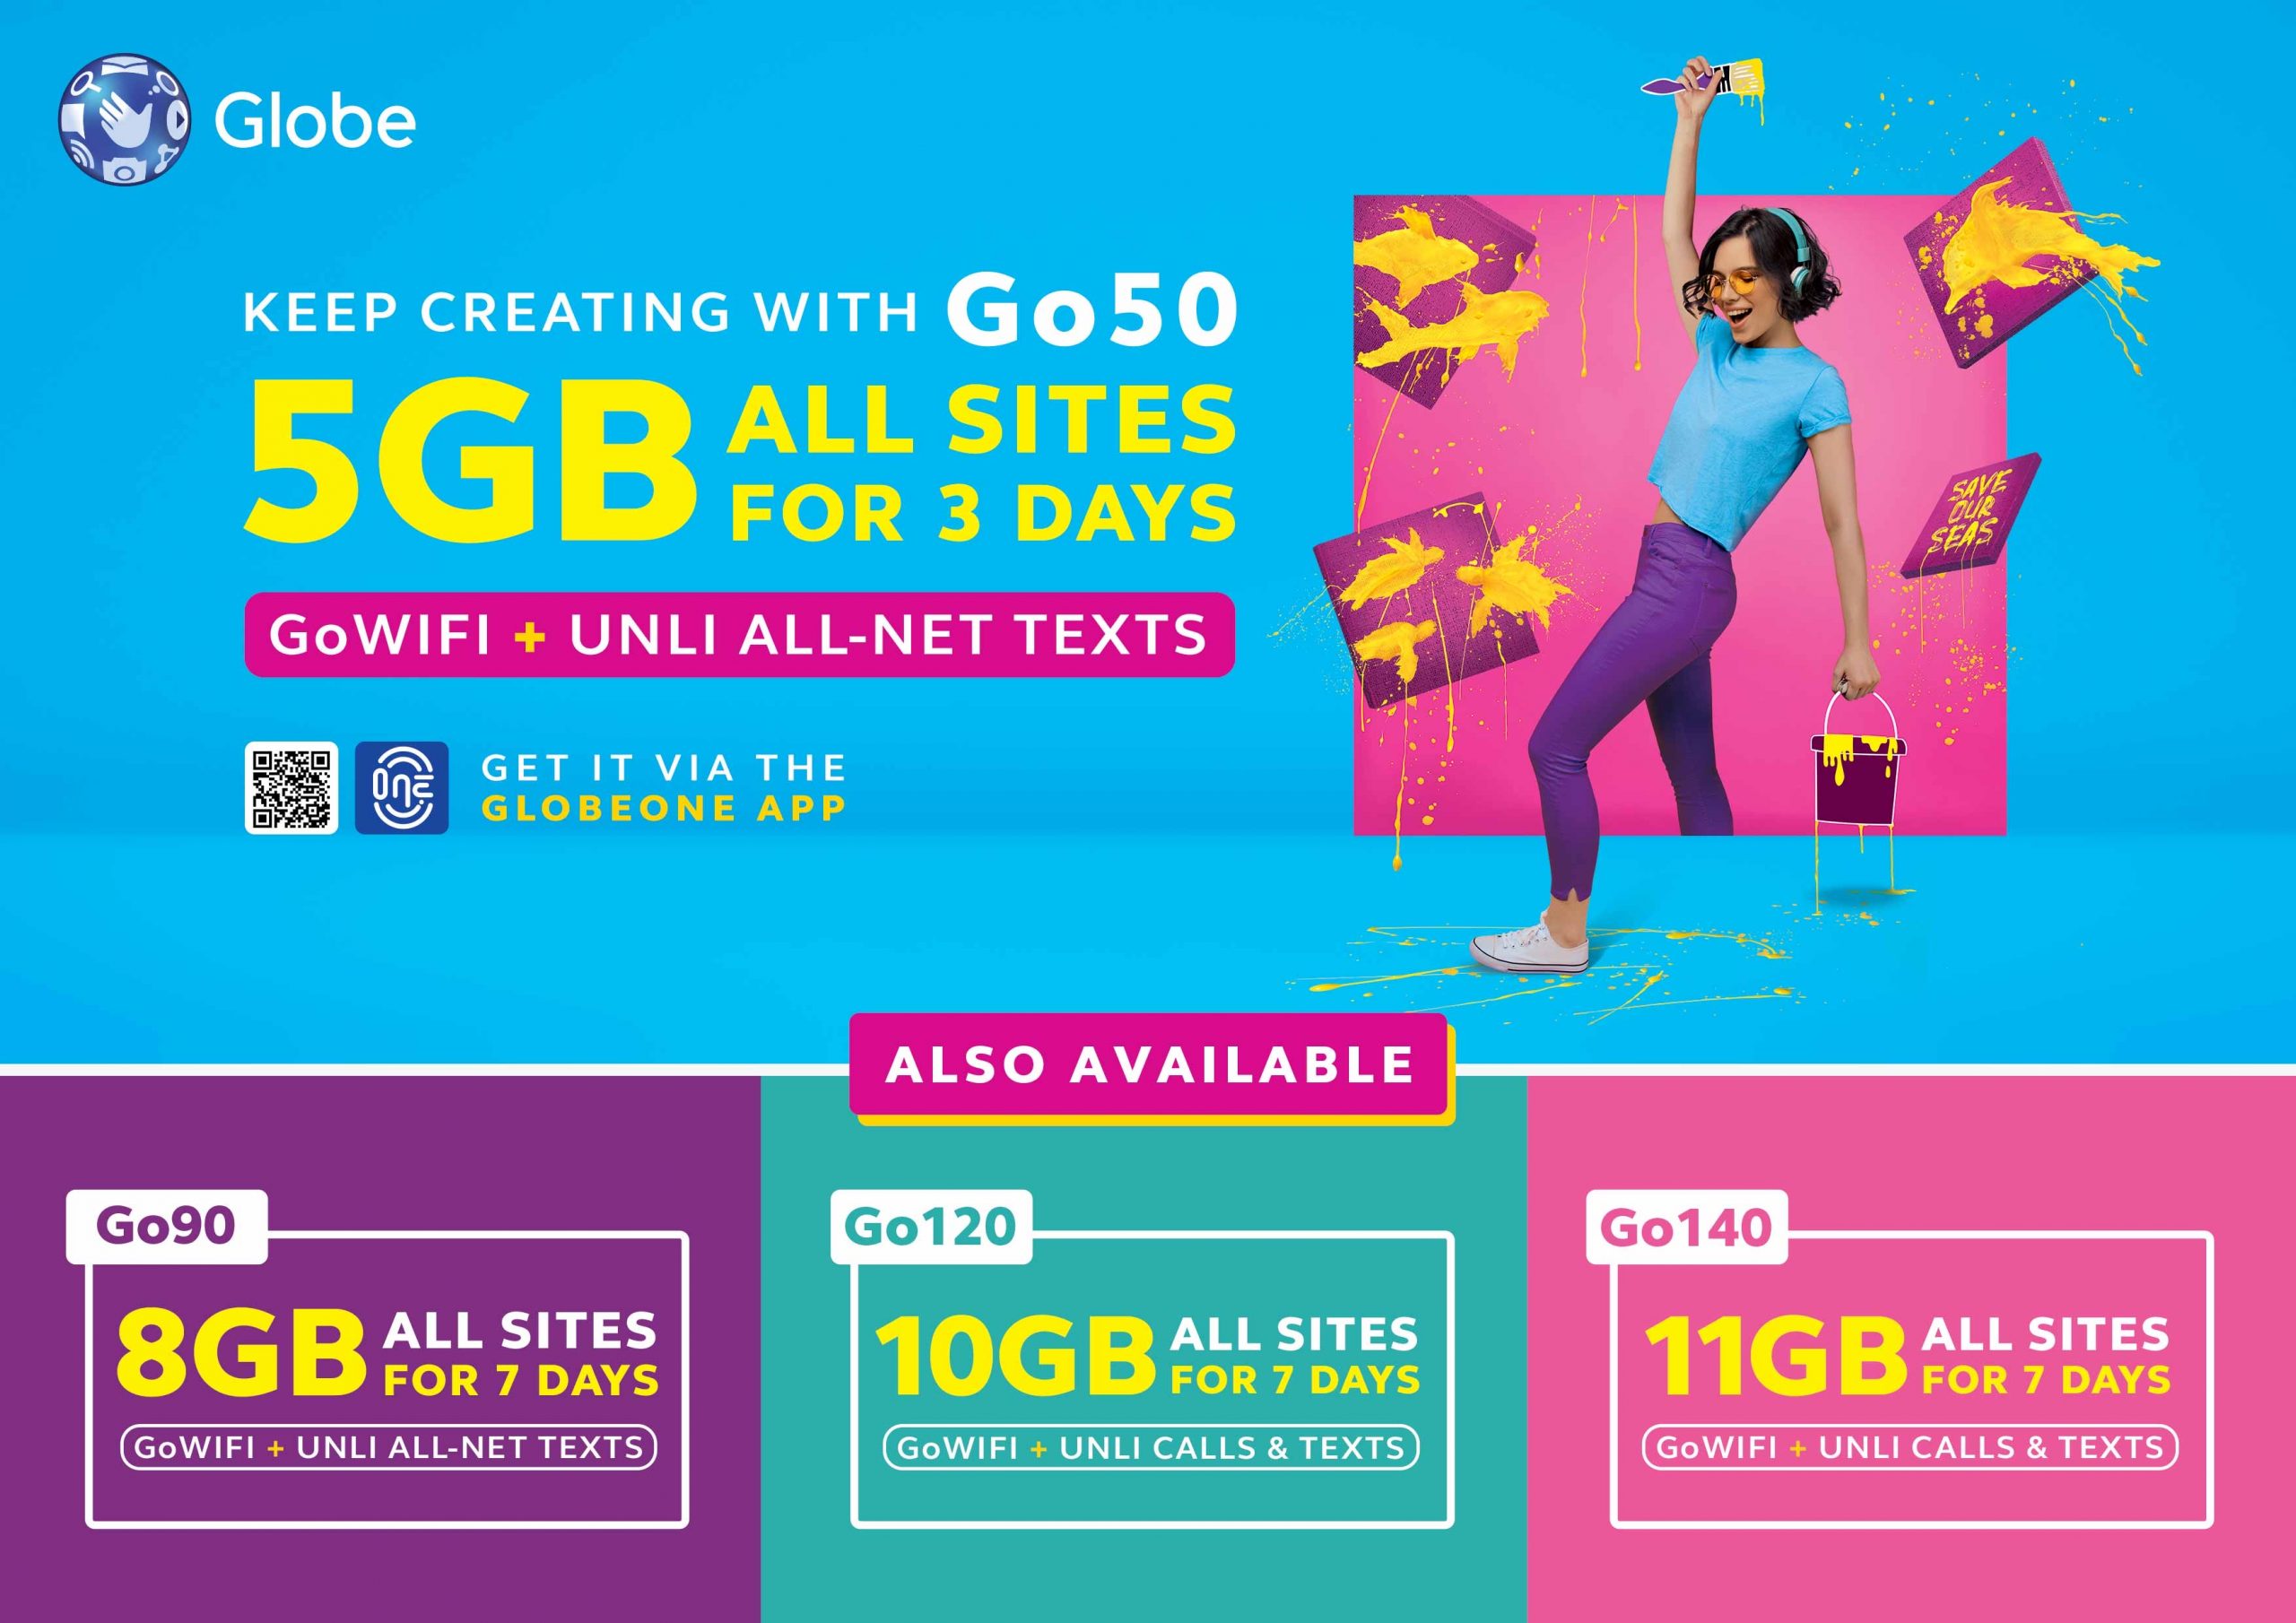 Go for More with Globe Prepaid's Newest and Biggest Promo A LifeStyle